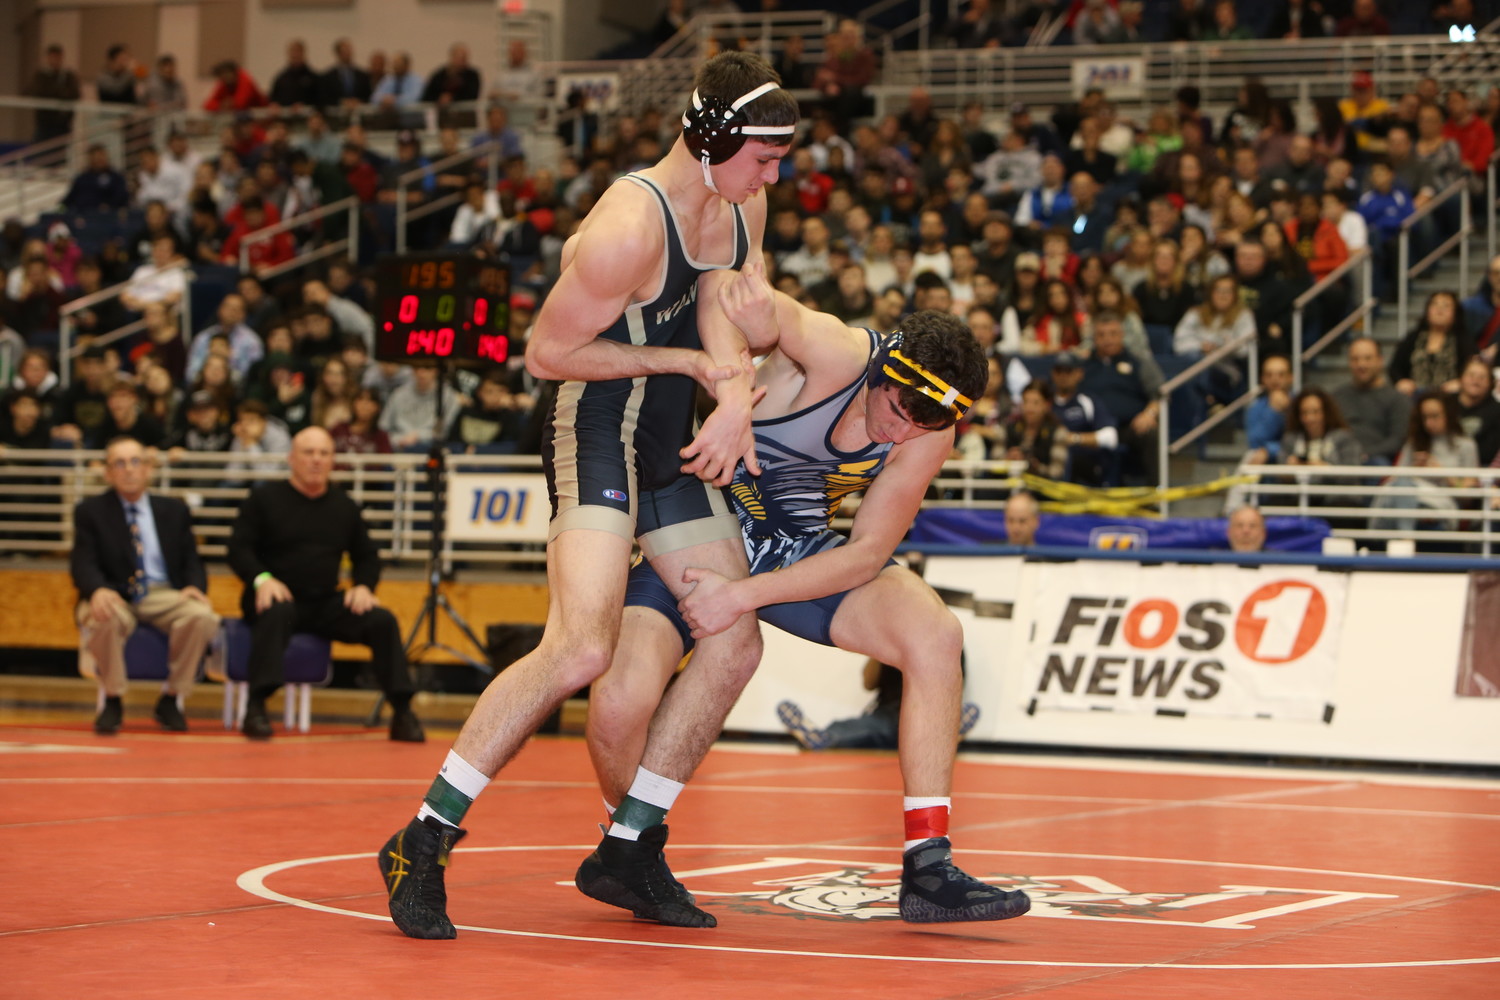 Wantagh’s Jonathan Loew, left, blocked a single leg takedown by Massapequa’s Marco Musso, right, in the first round of the Nassau County Division I wrestling championship’s 195-pound championship match. Loew later won the match via pinfall in the second round.